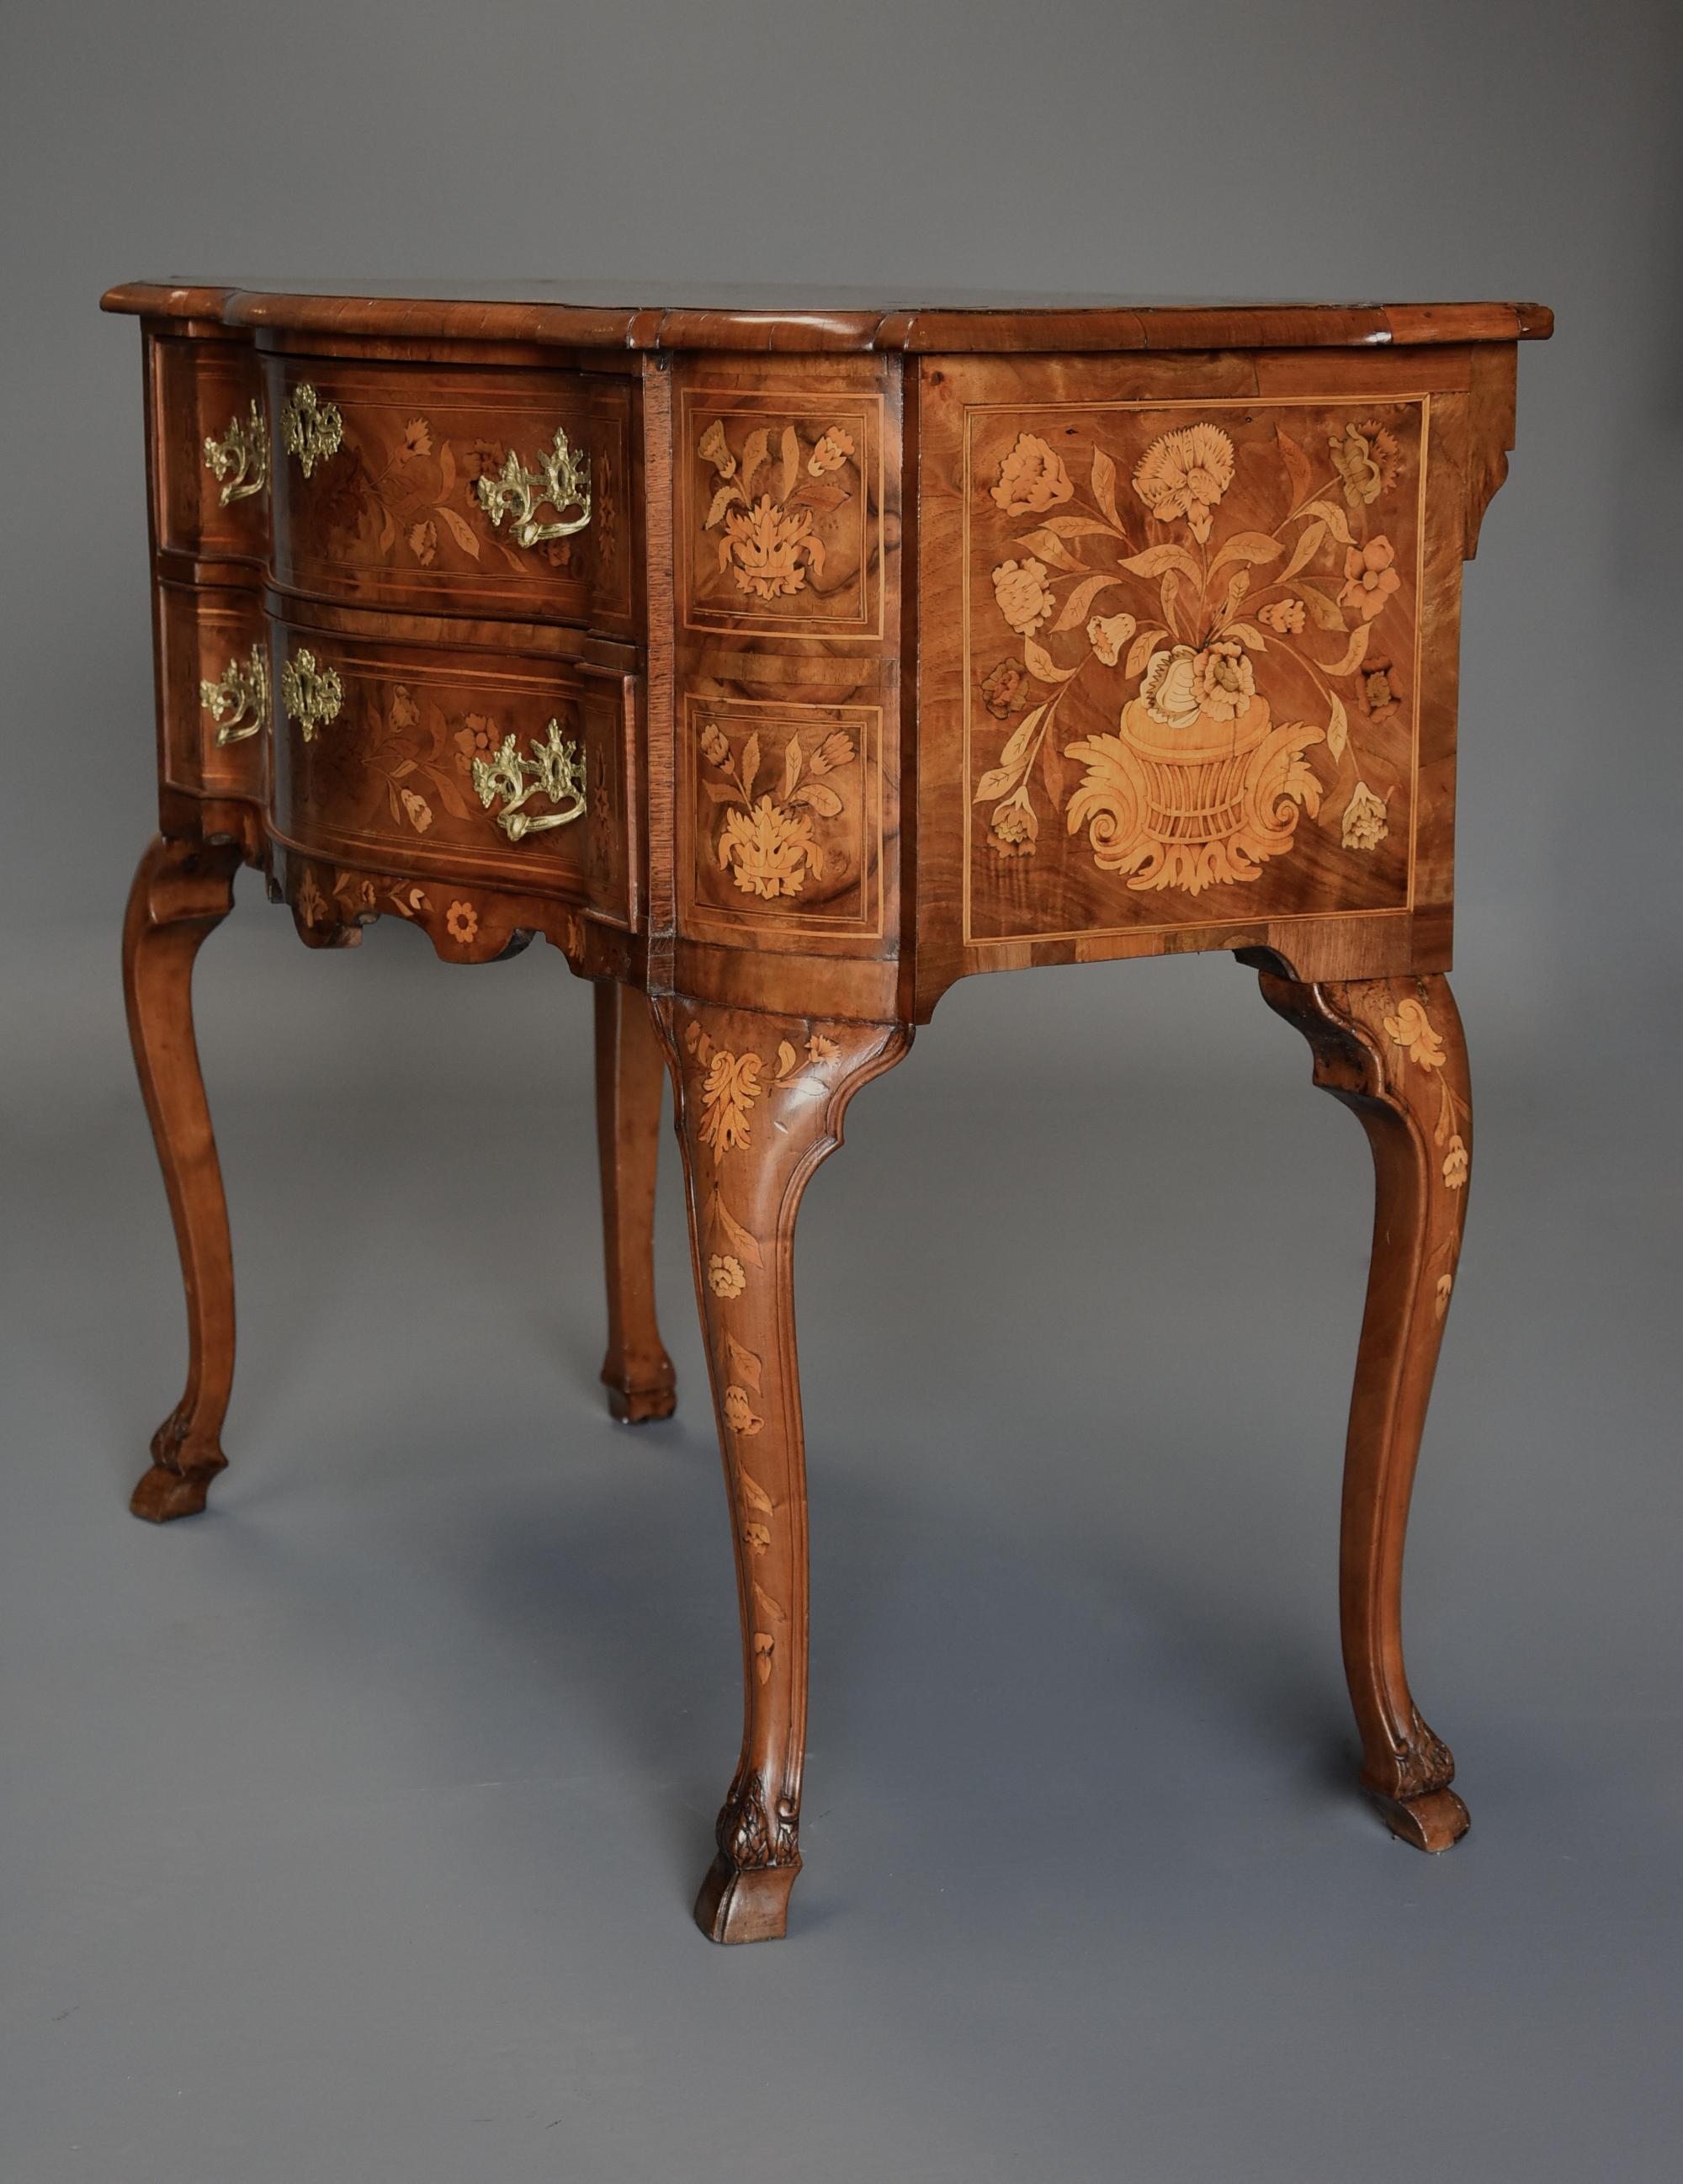 Fine Quality Mid-19th Century Floral Marquetry Walnut Lowboy of Serpentine Form For Sale 3